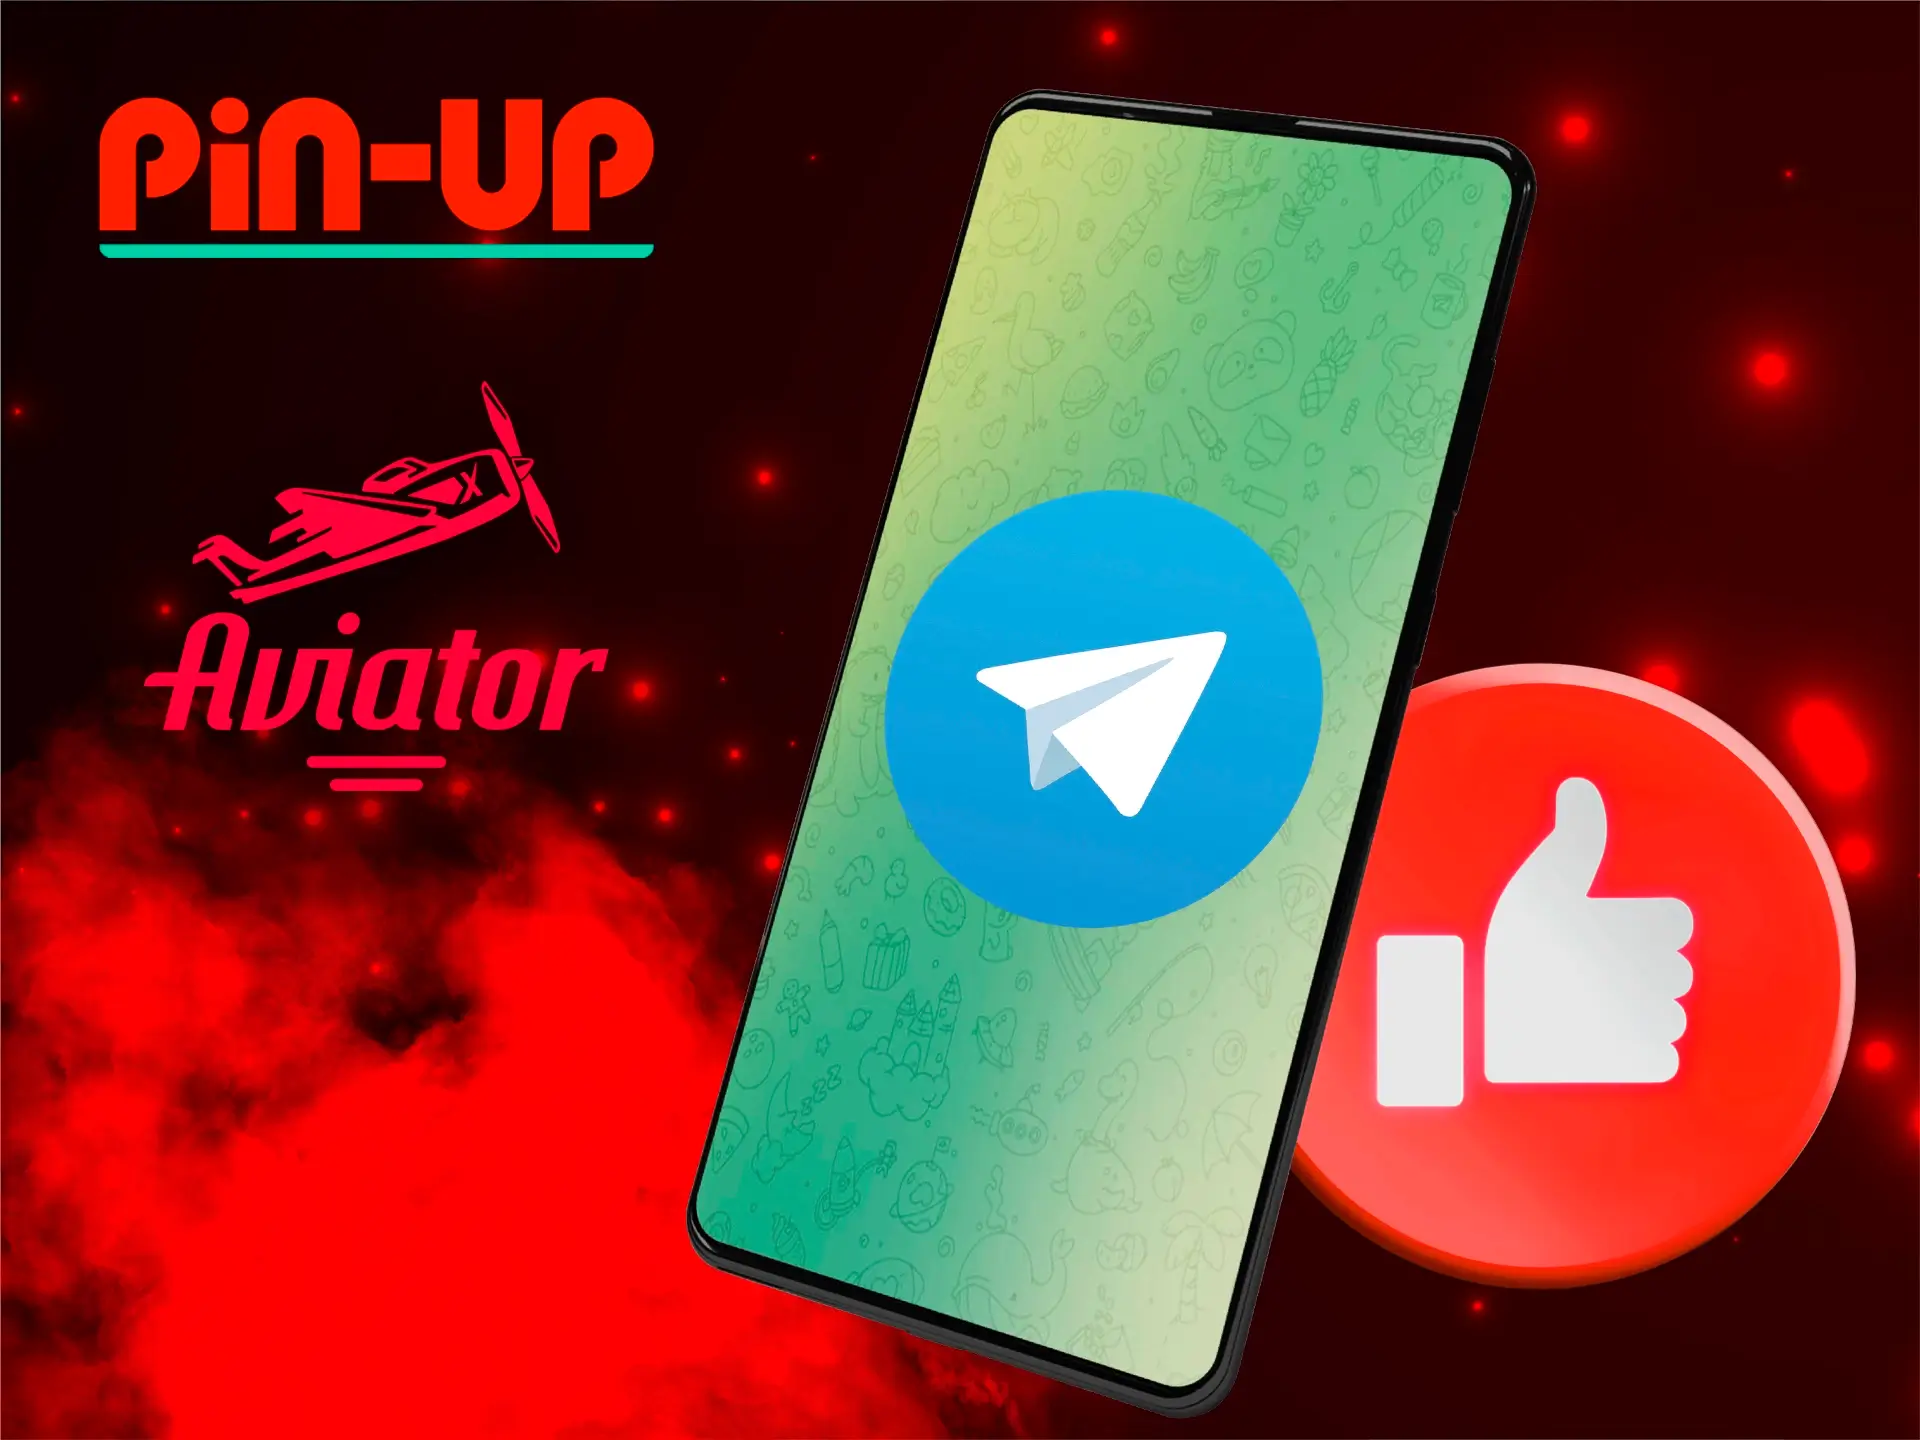 Get signals for Aviator using telegram channels and win big money in Pin-Up.